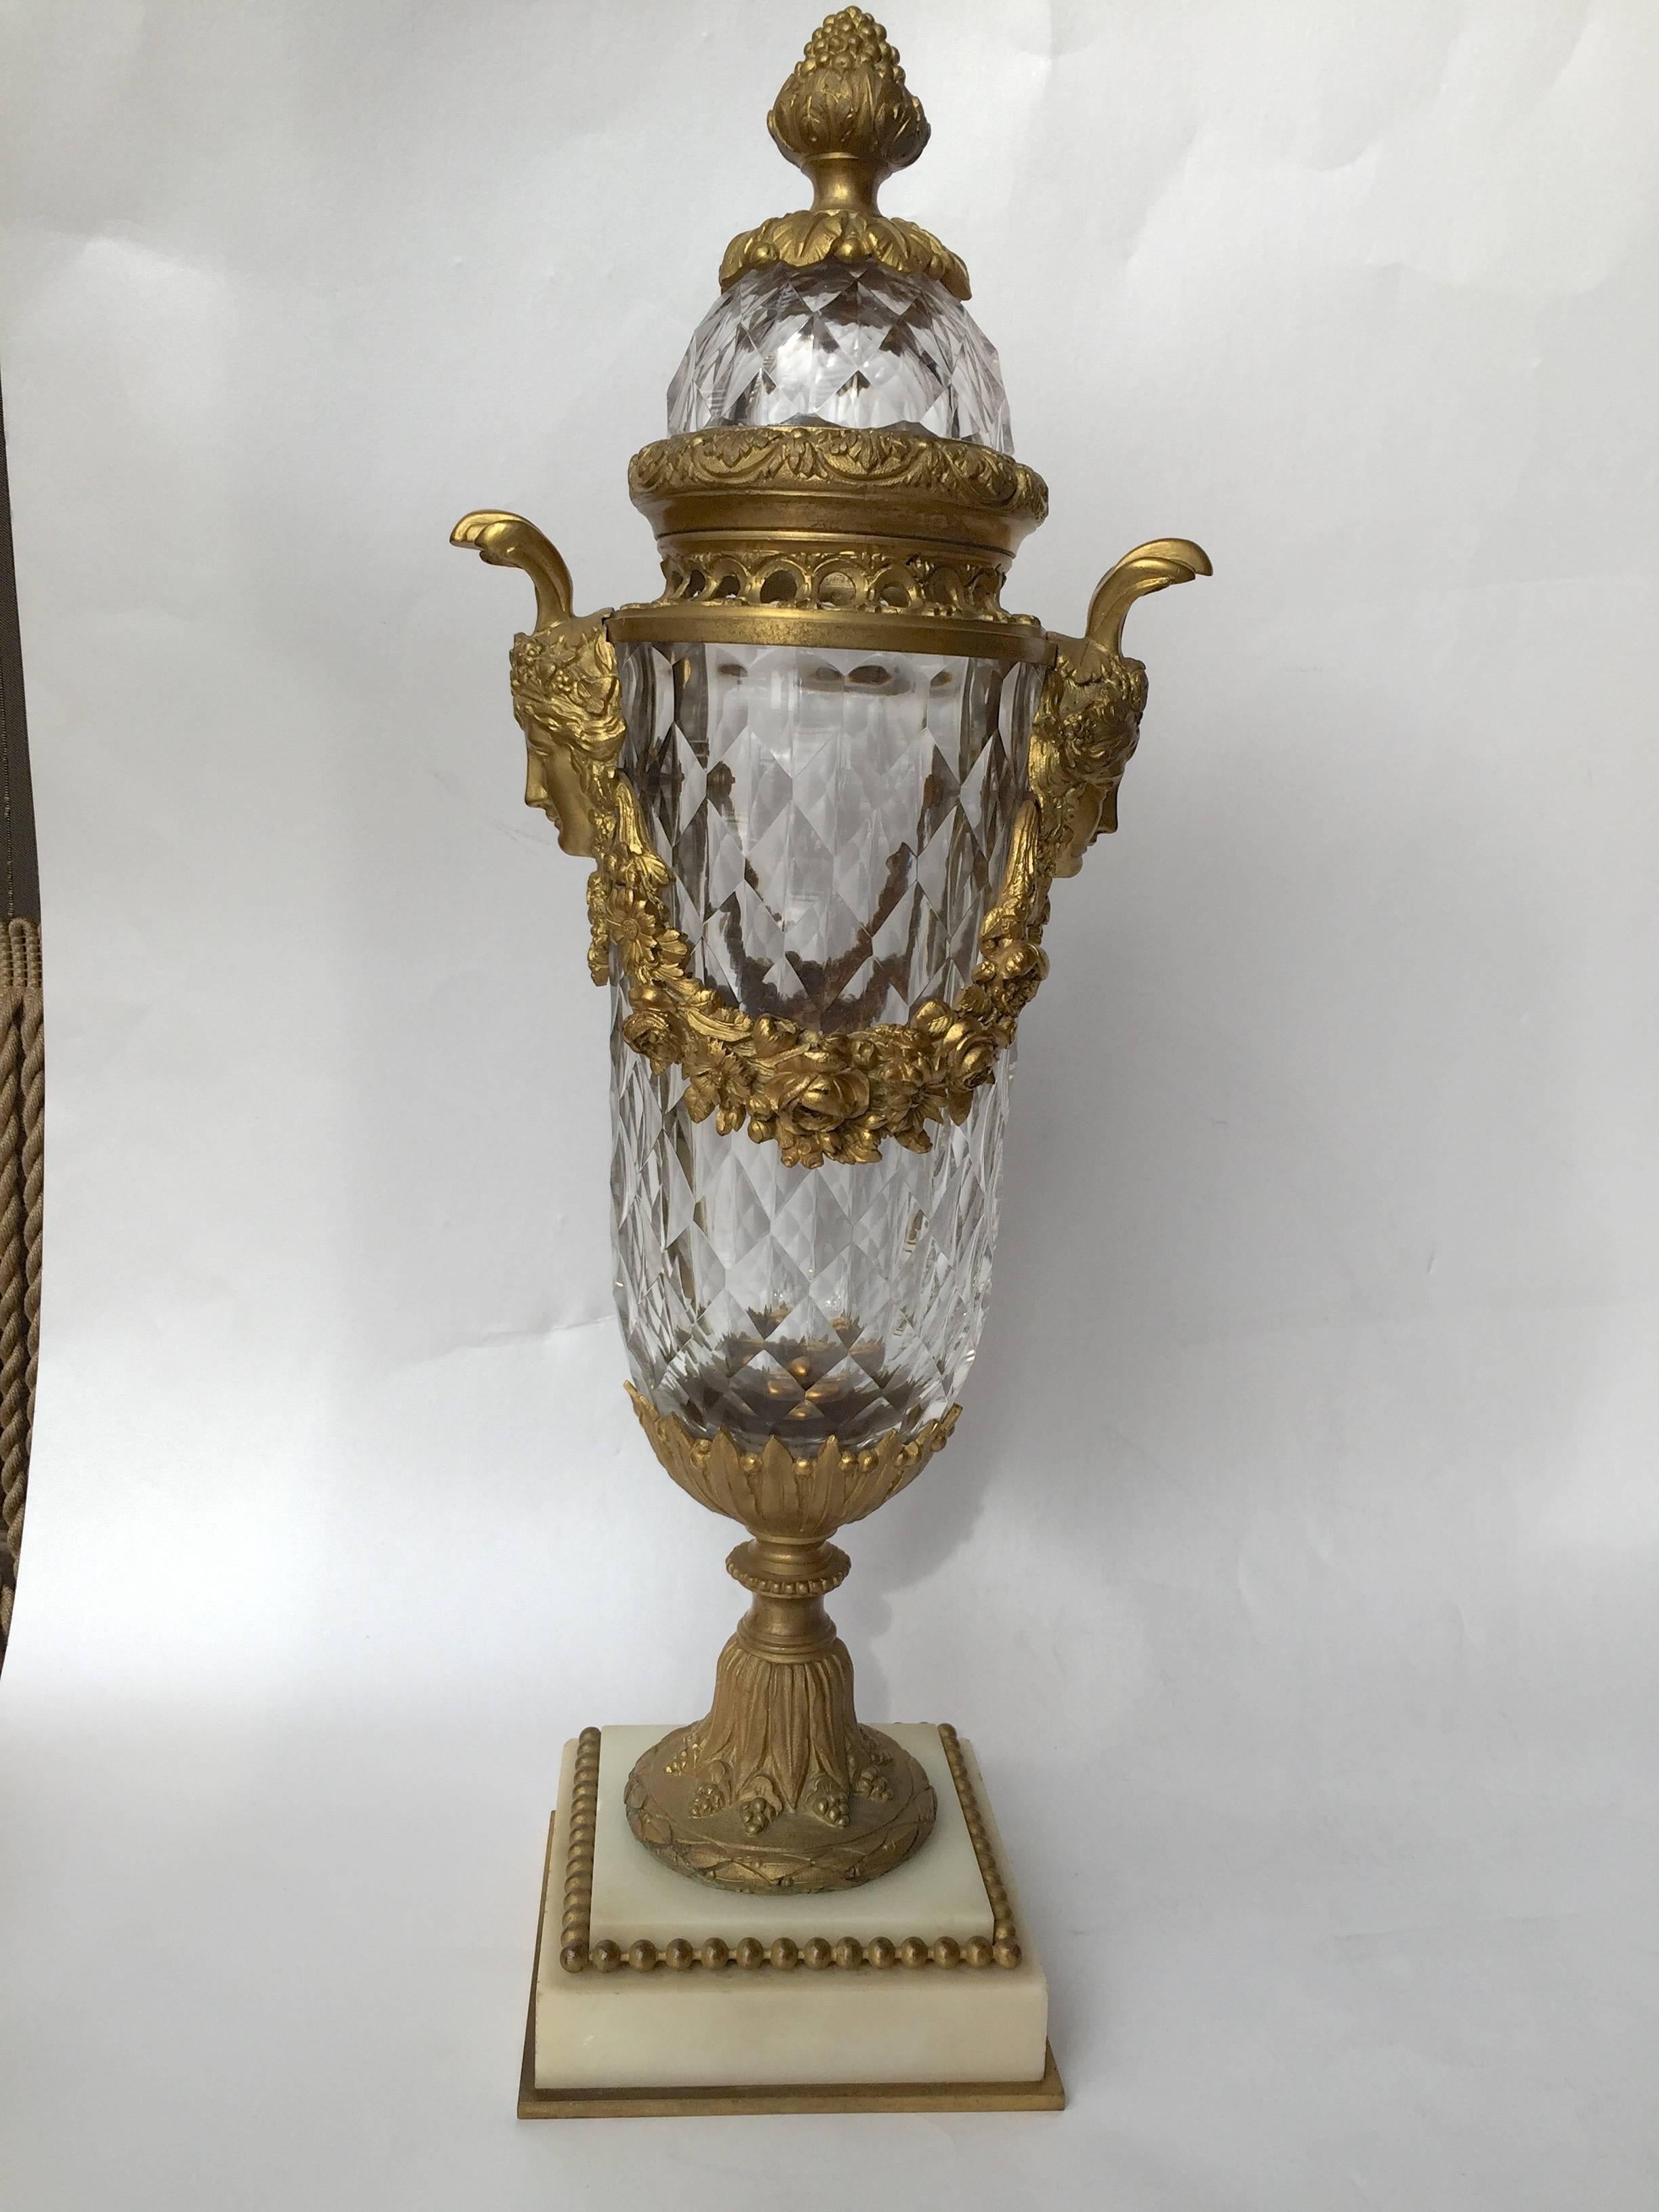  Baccarat Attribution Cut Crystal and Gilt Bronze Mounted Urns Circa 1890 In Excellent Condition For Sale In Redding, CA